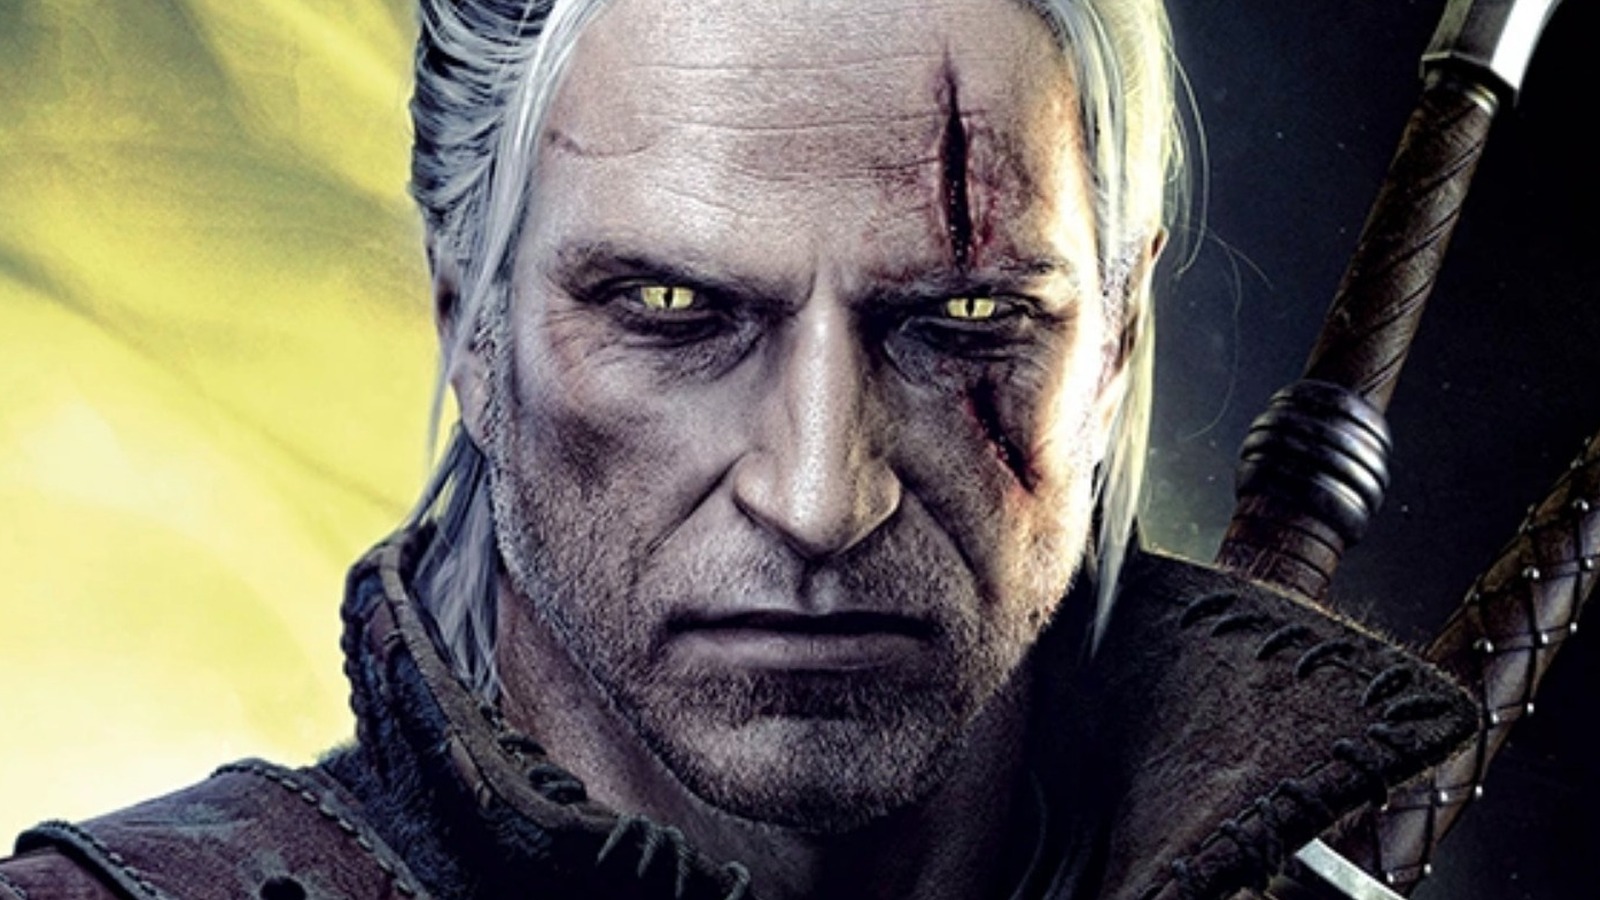 Why The Witcher 2 Almost Didn't Happen